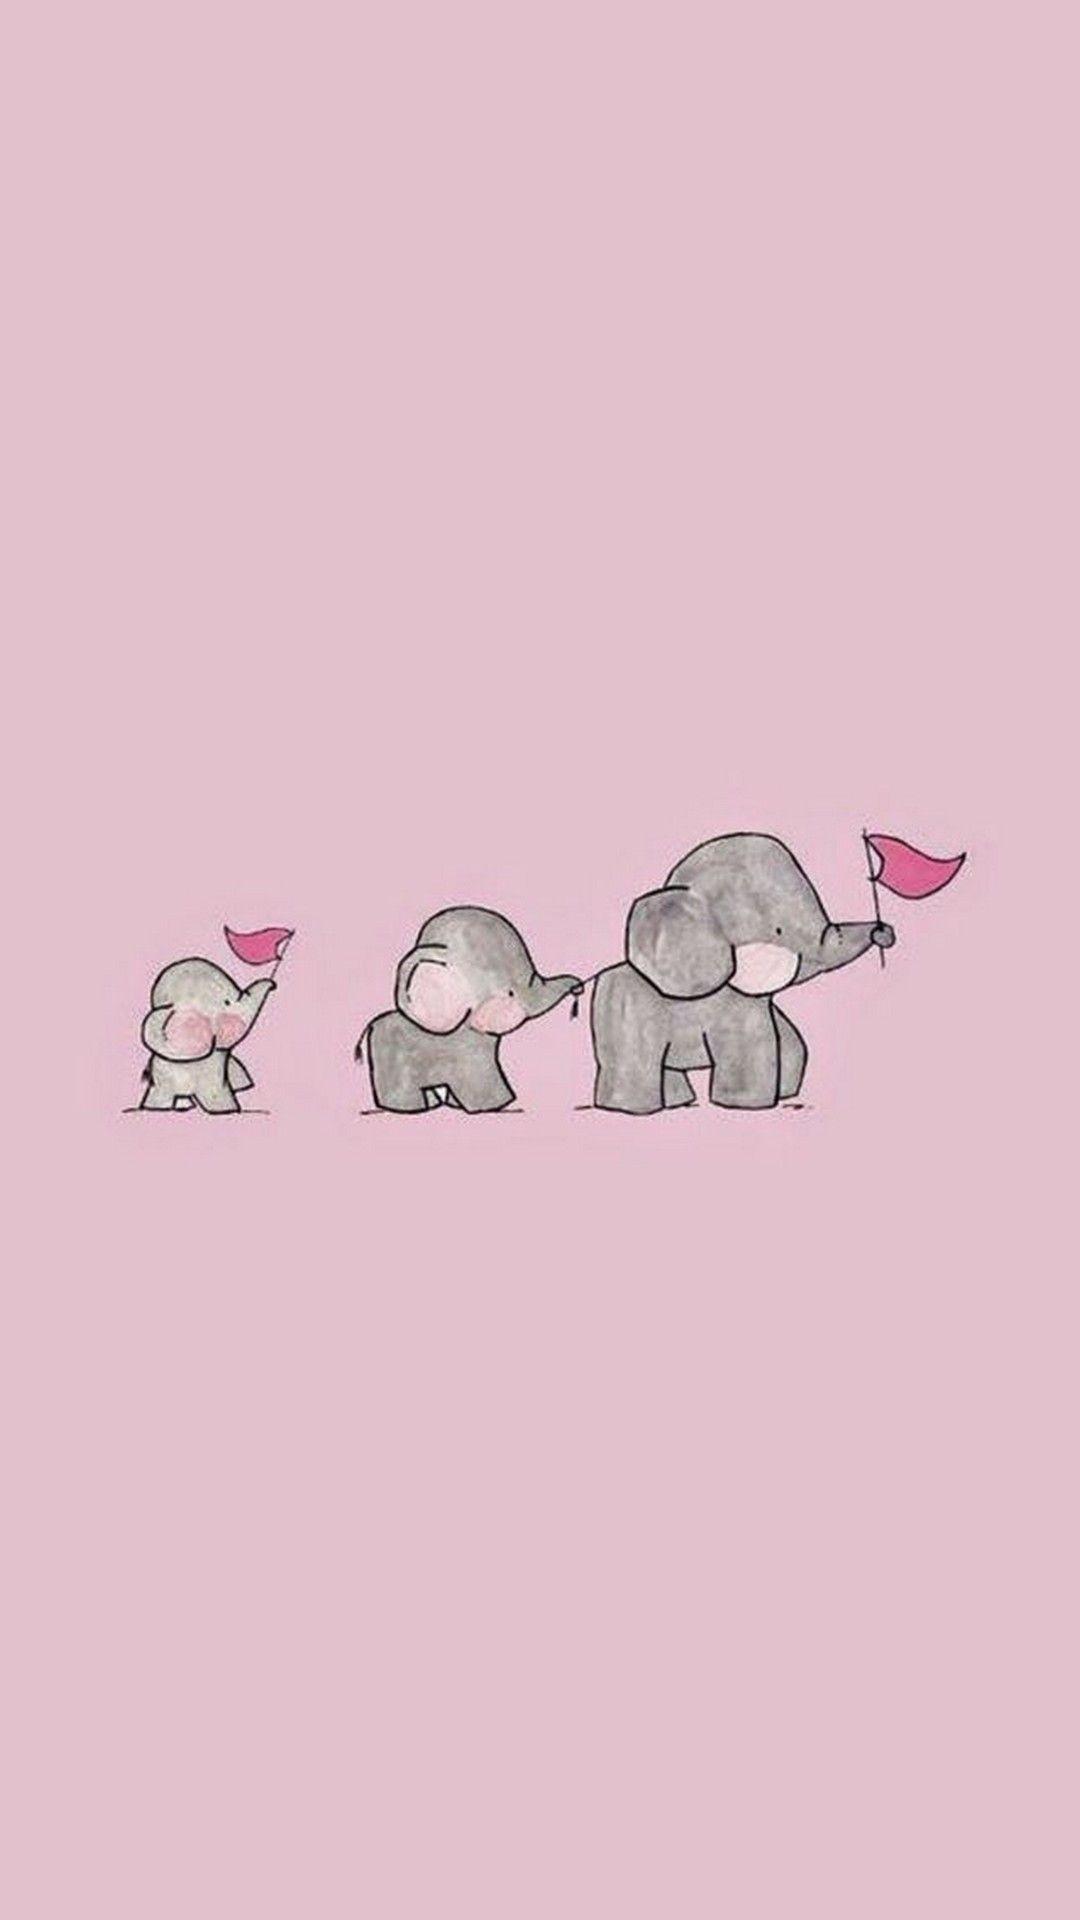 Cute Animated Pink Wallpaper Android Android Wallpaper. Baby pink wallpaper iphone, Pink wallpaper android, Elephant wallpaper